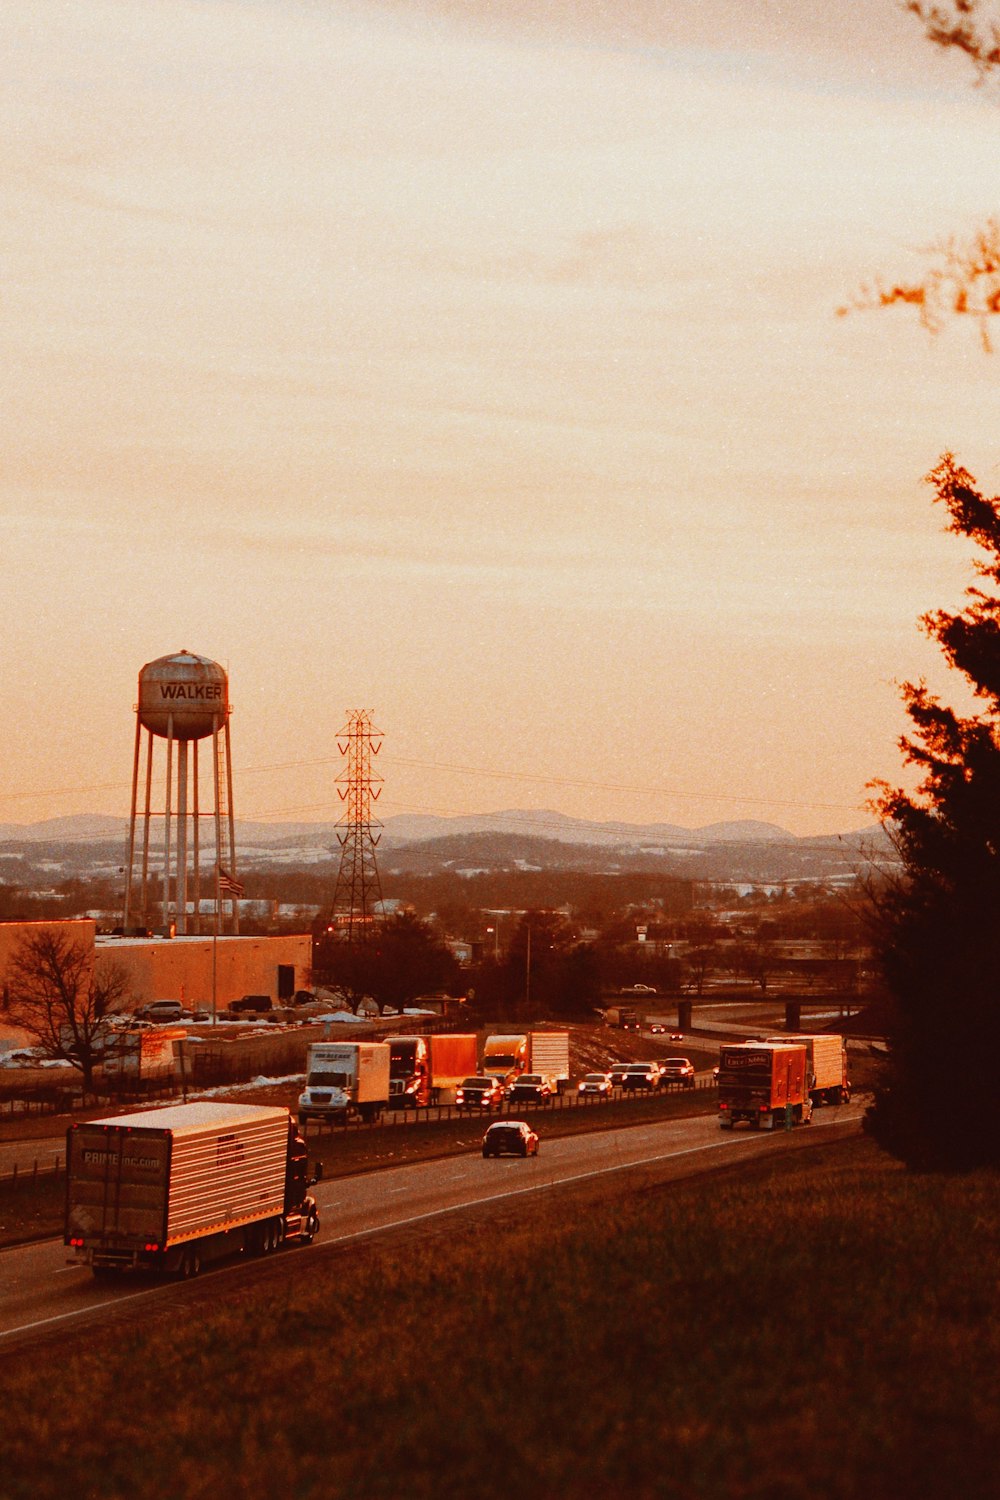 a traffic jam on a highway with a water tower in the background